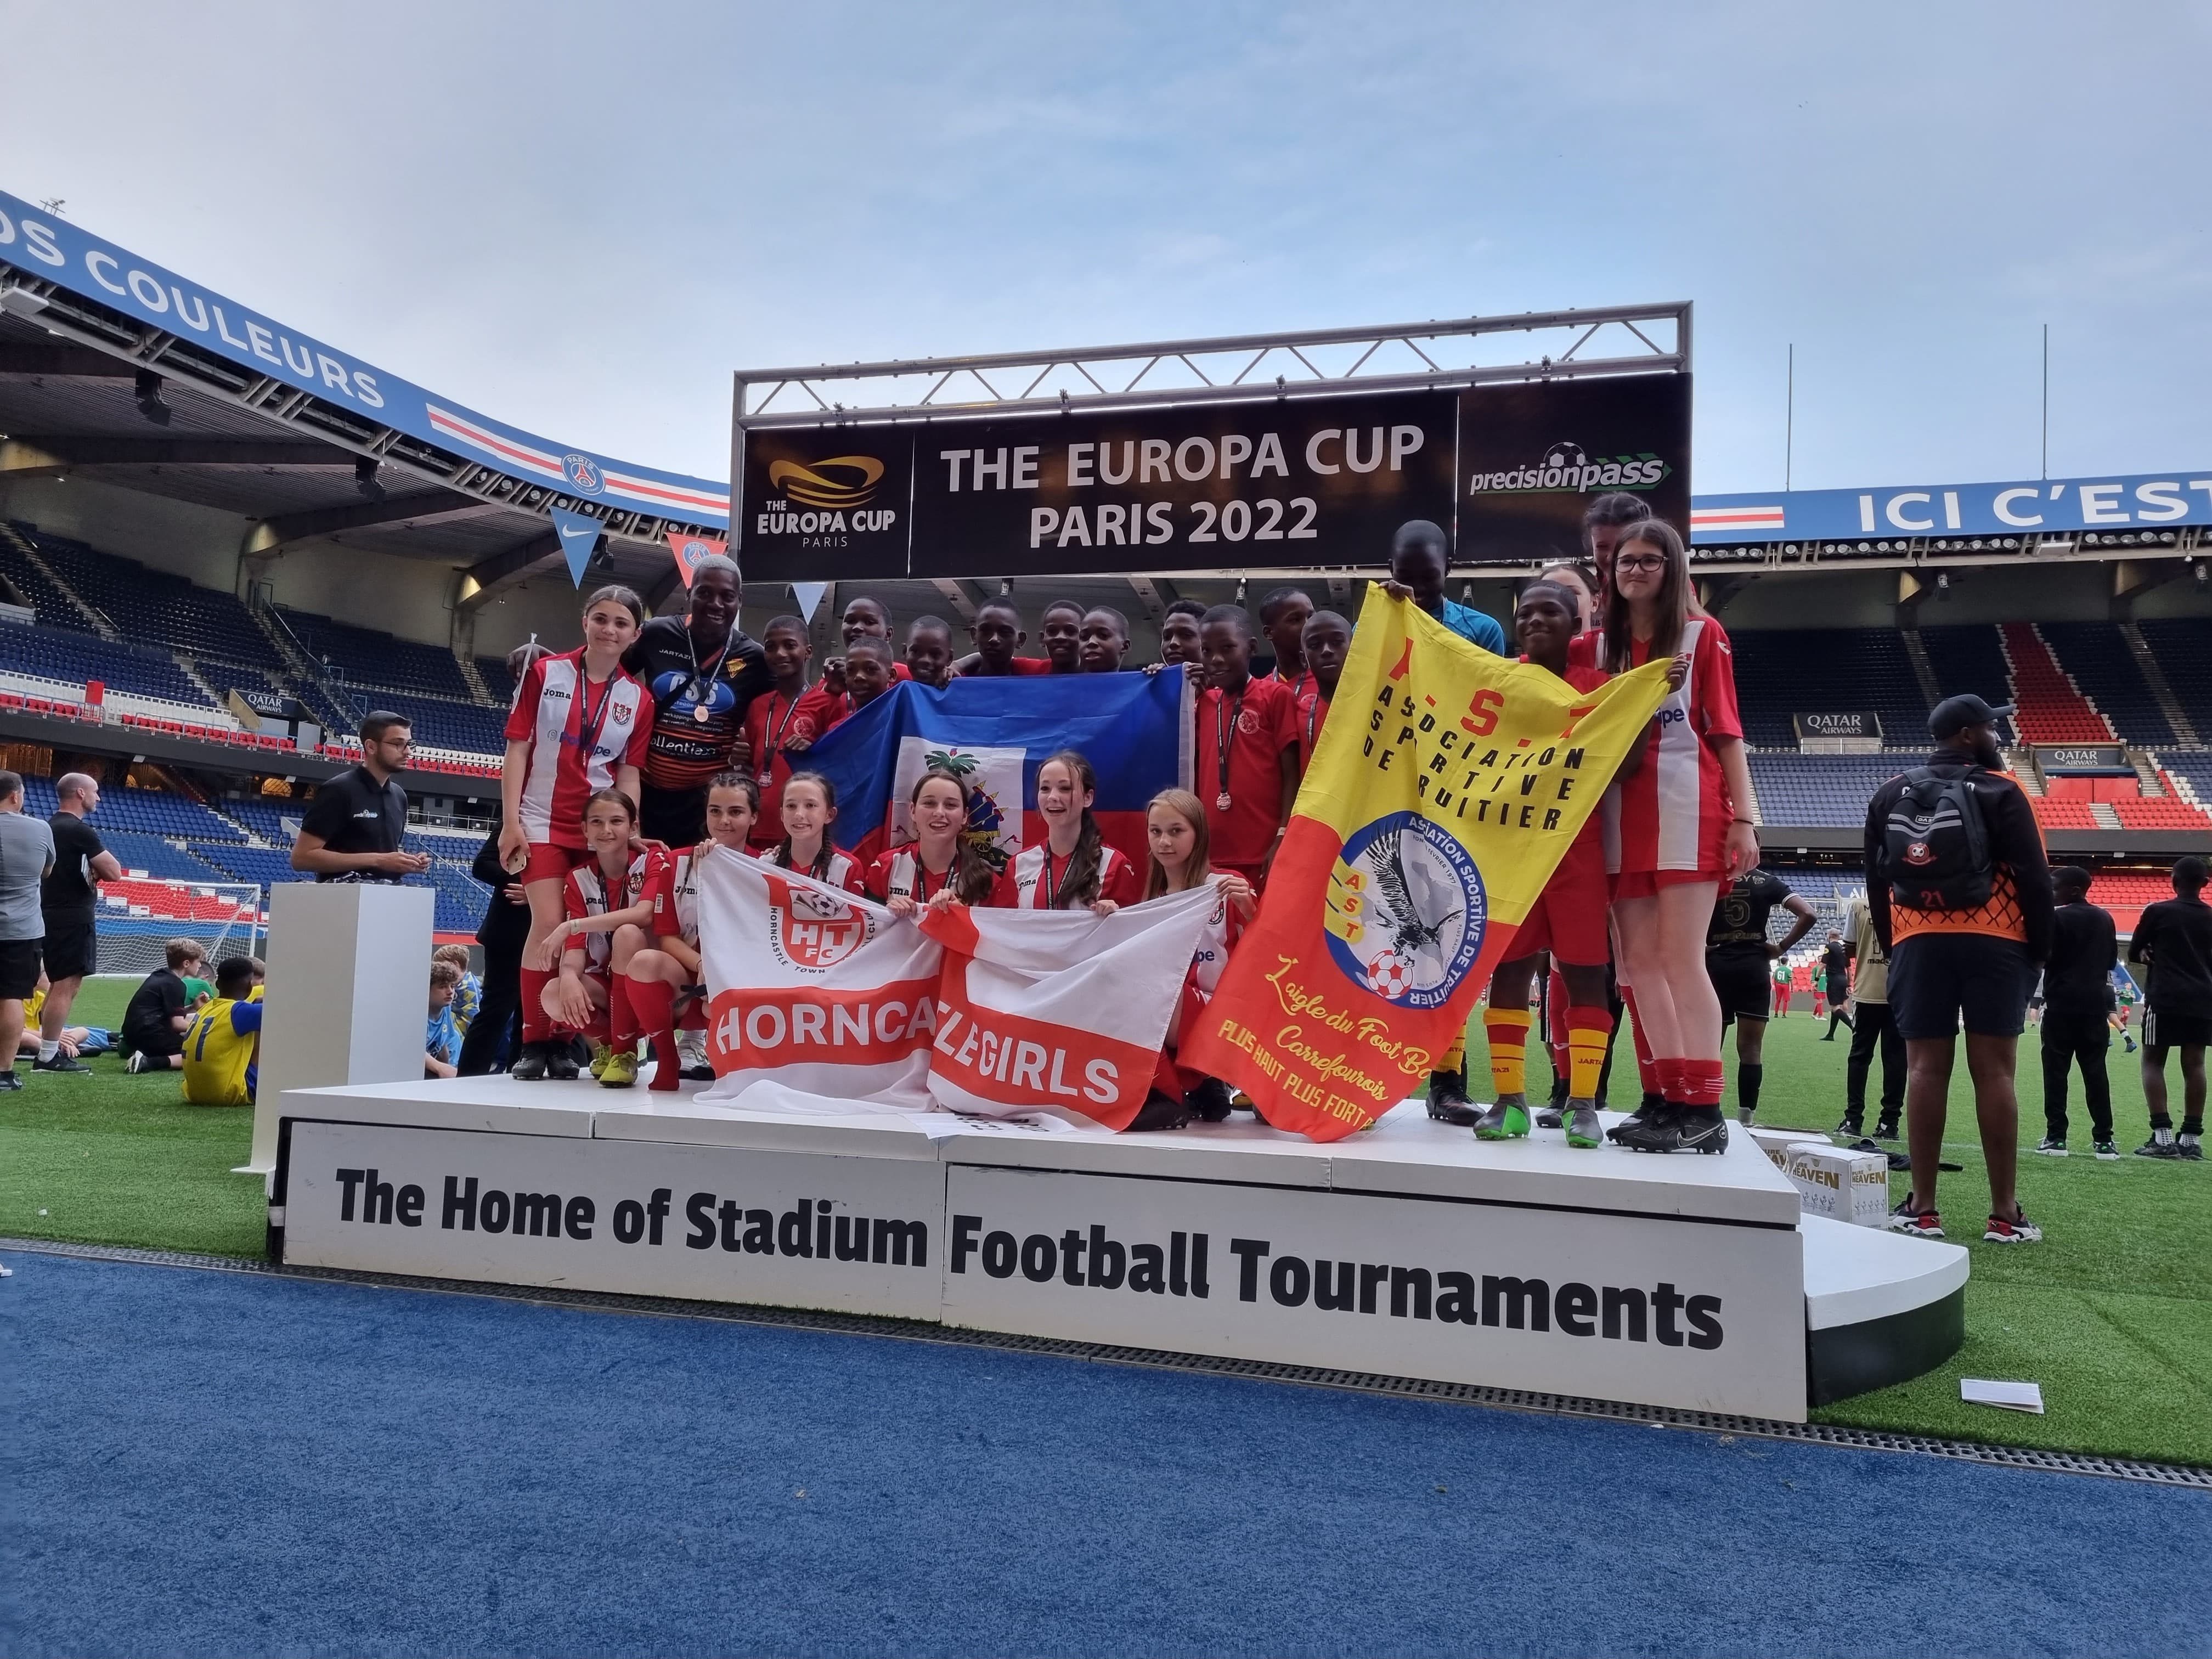 The Europa Cup International Youth Football Tournament & Football Tour